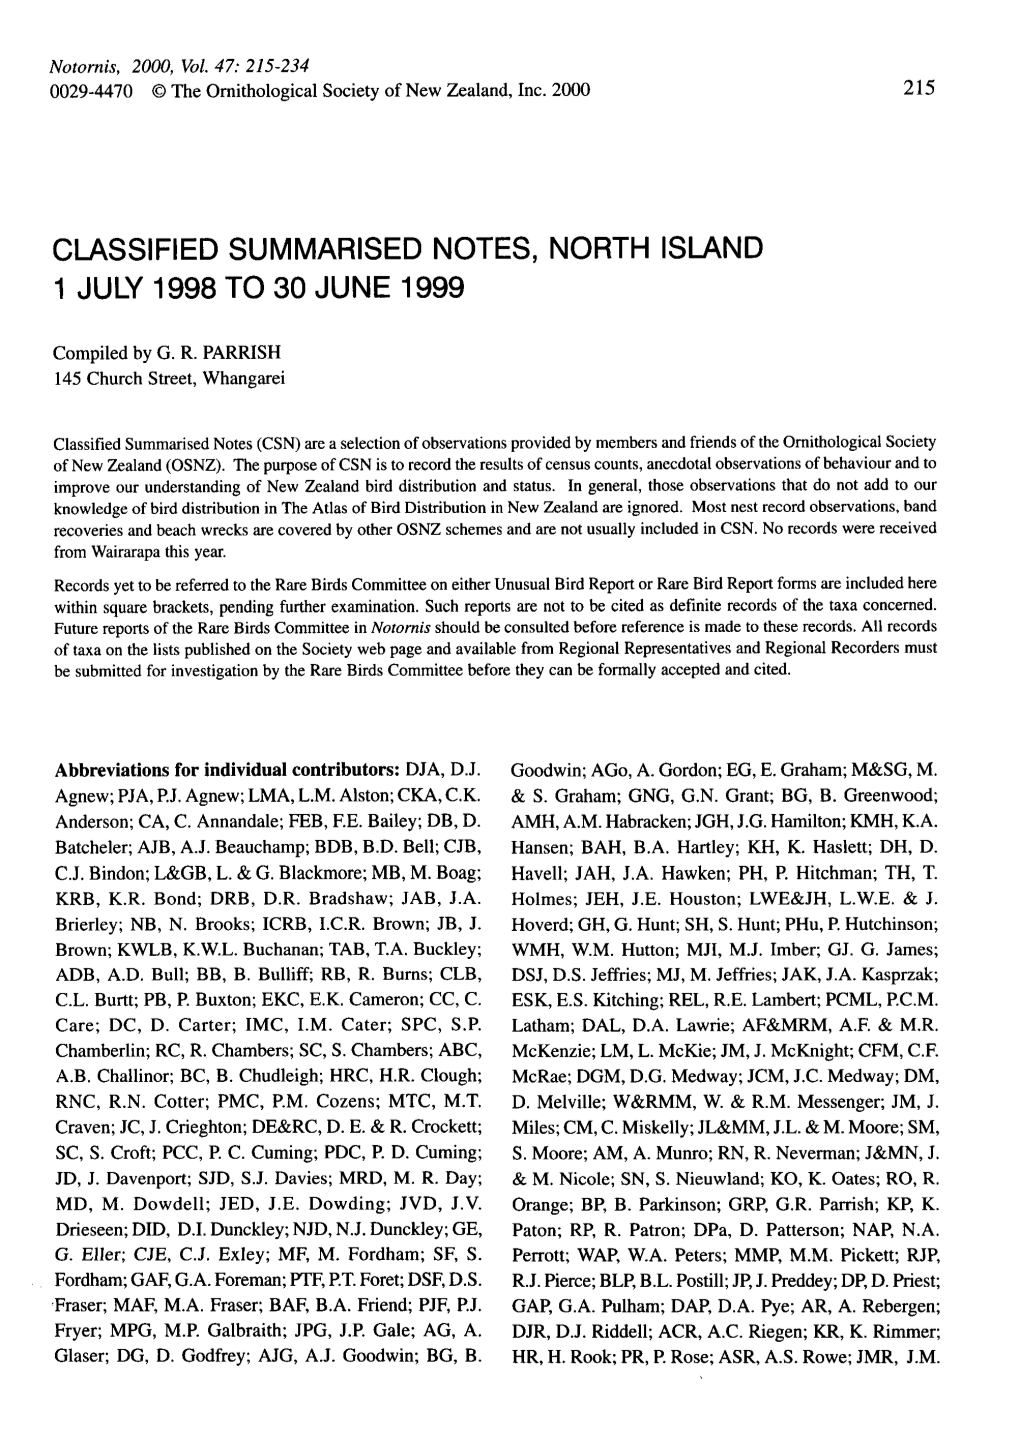 Classified Summarised Notes, North Island 1 July 1998 to 30 June 1999